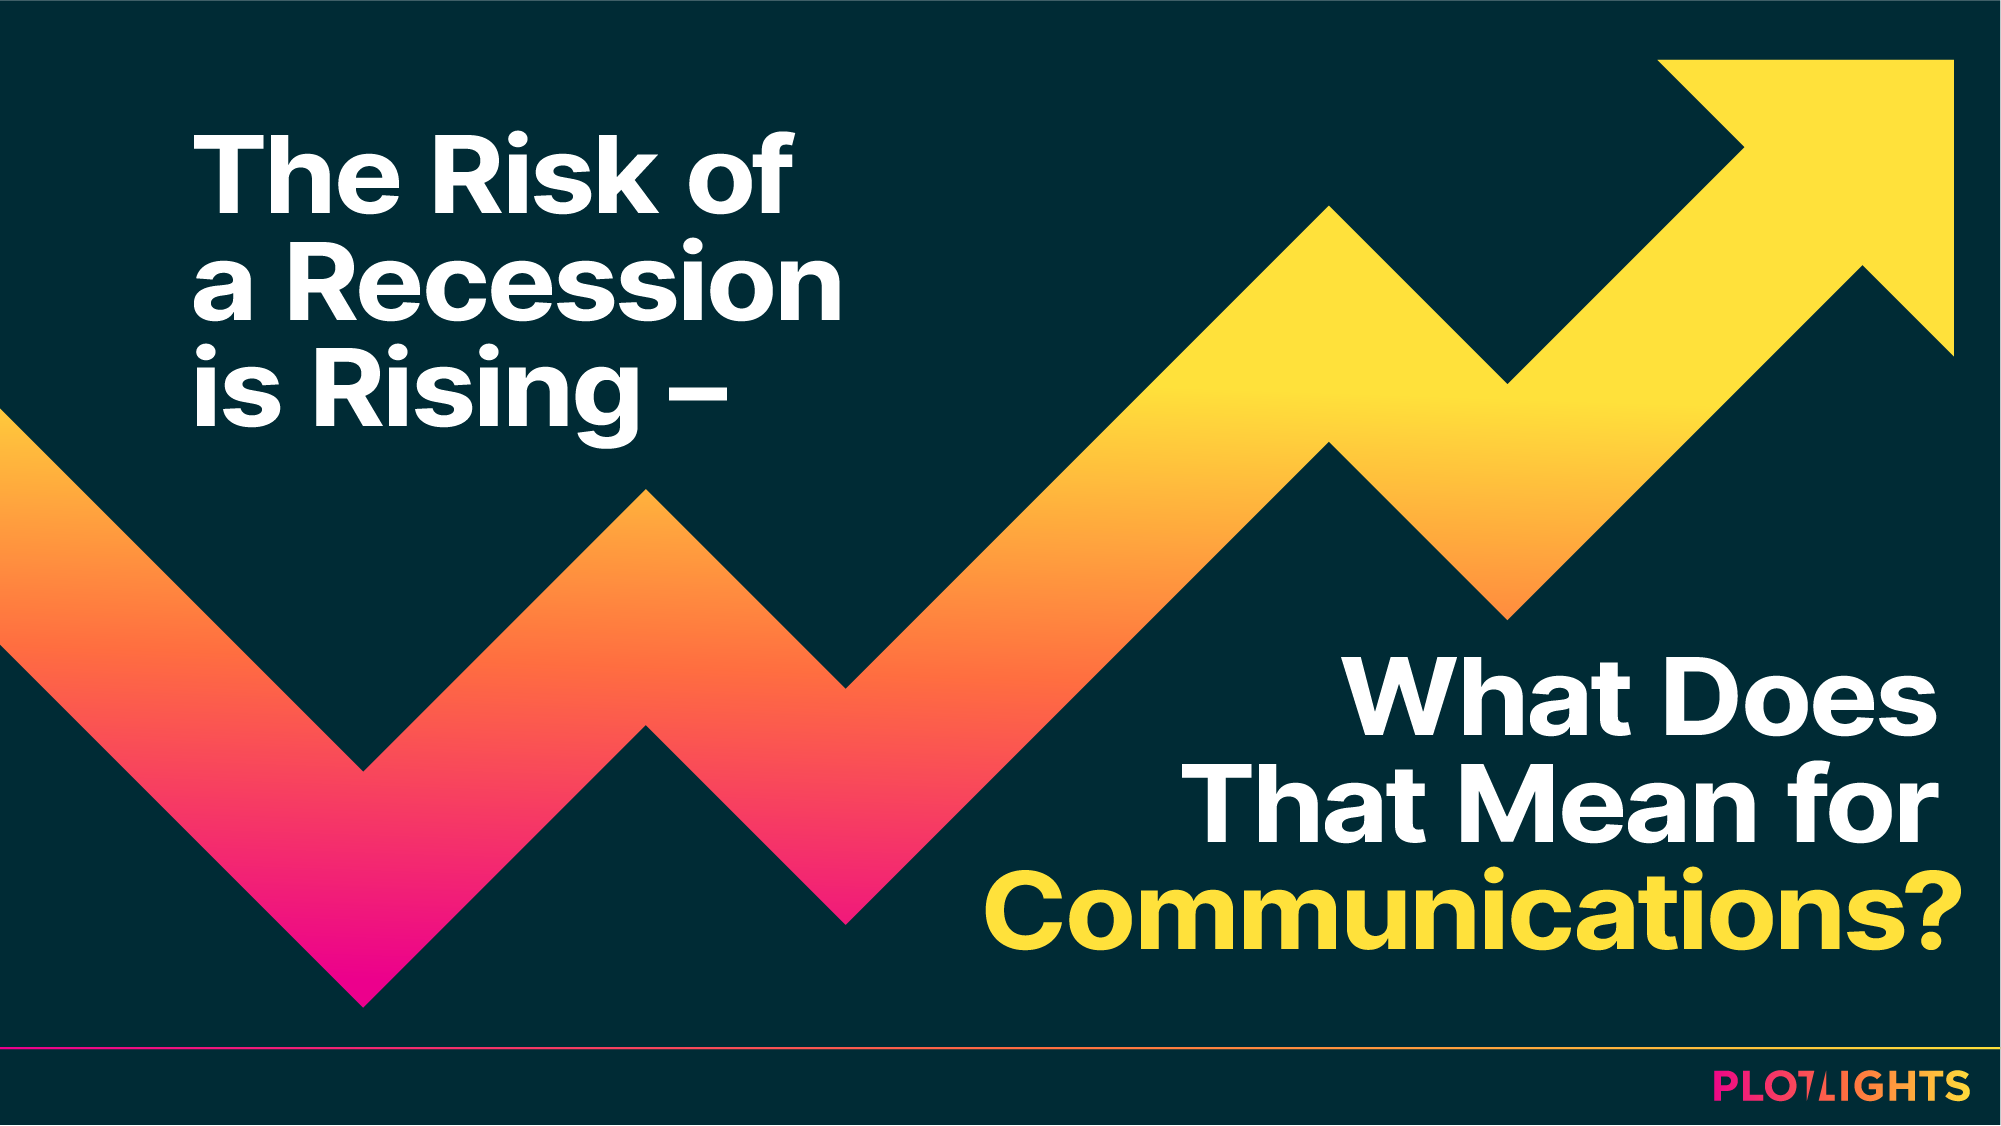 The Risk of a Recession Is Rising - What Does That Mean for Communications?